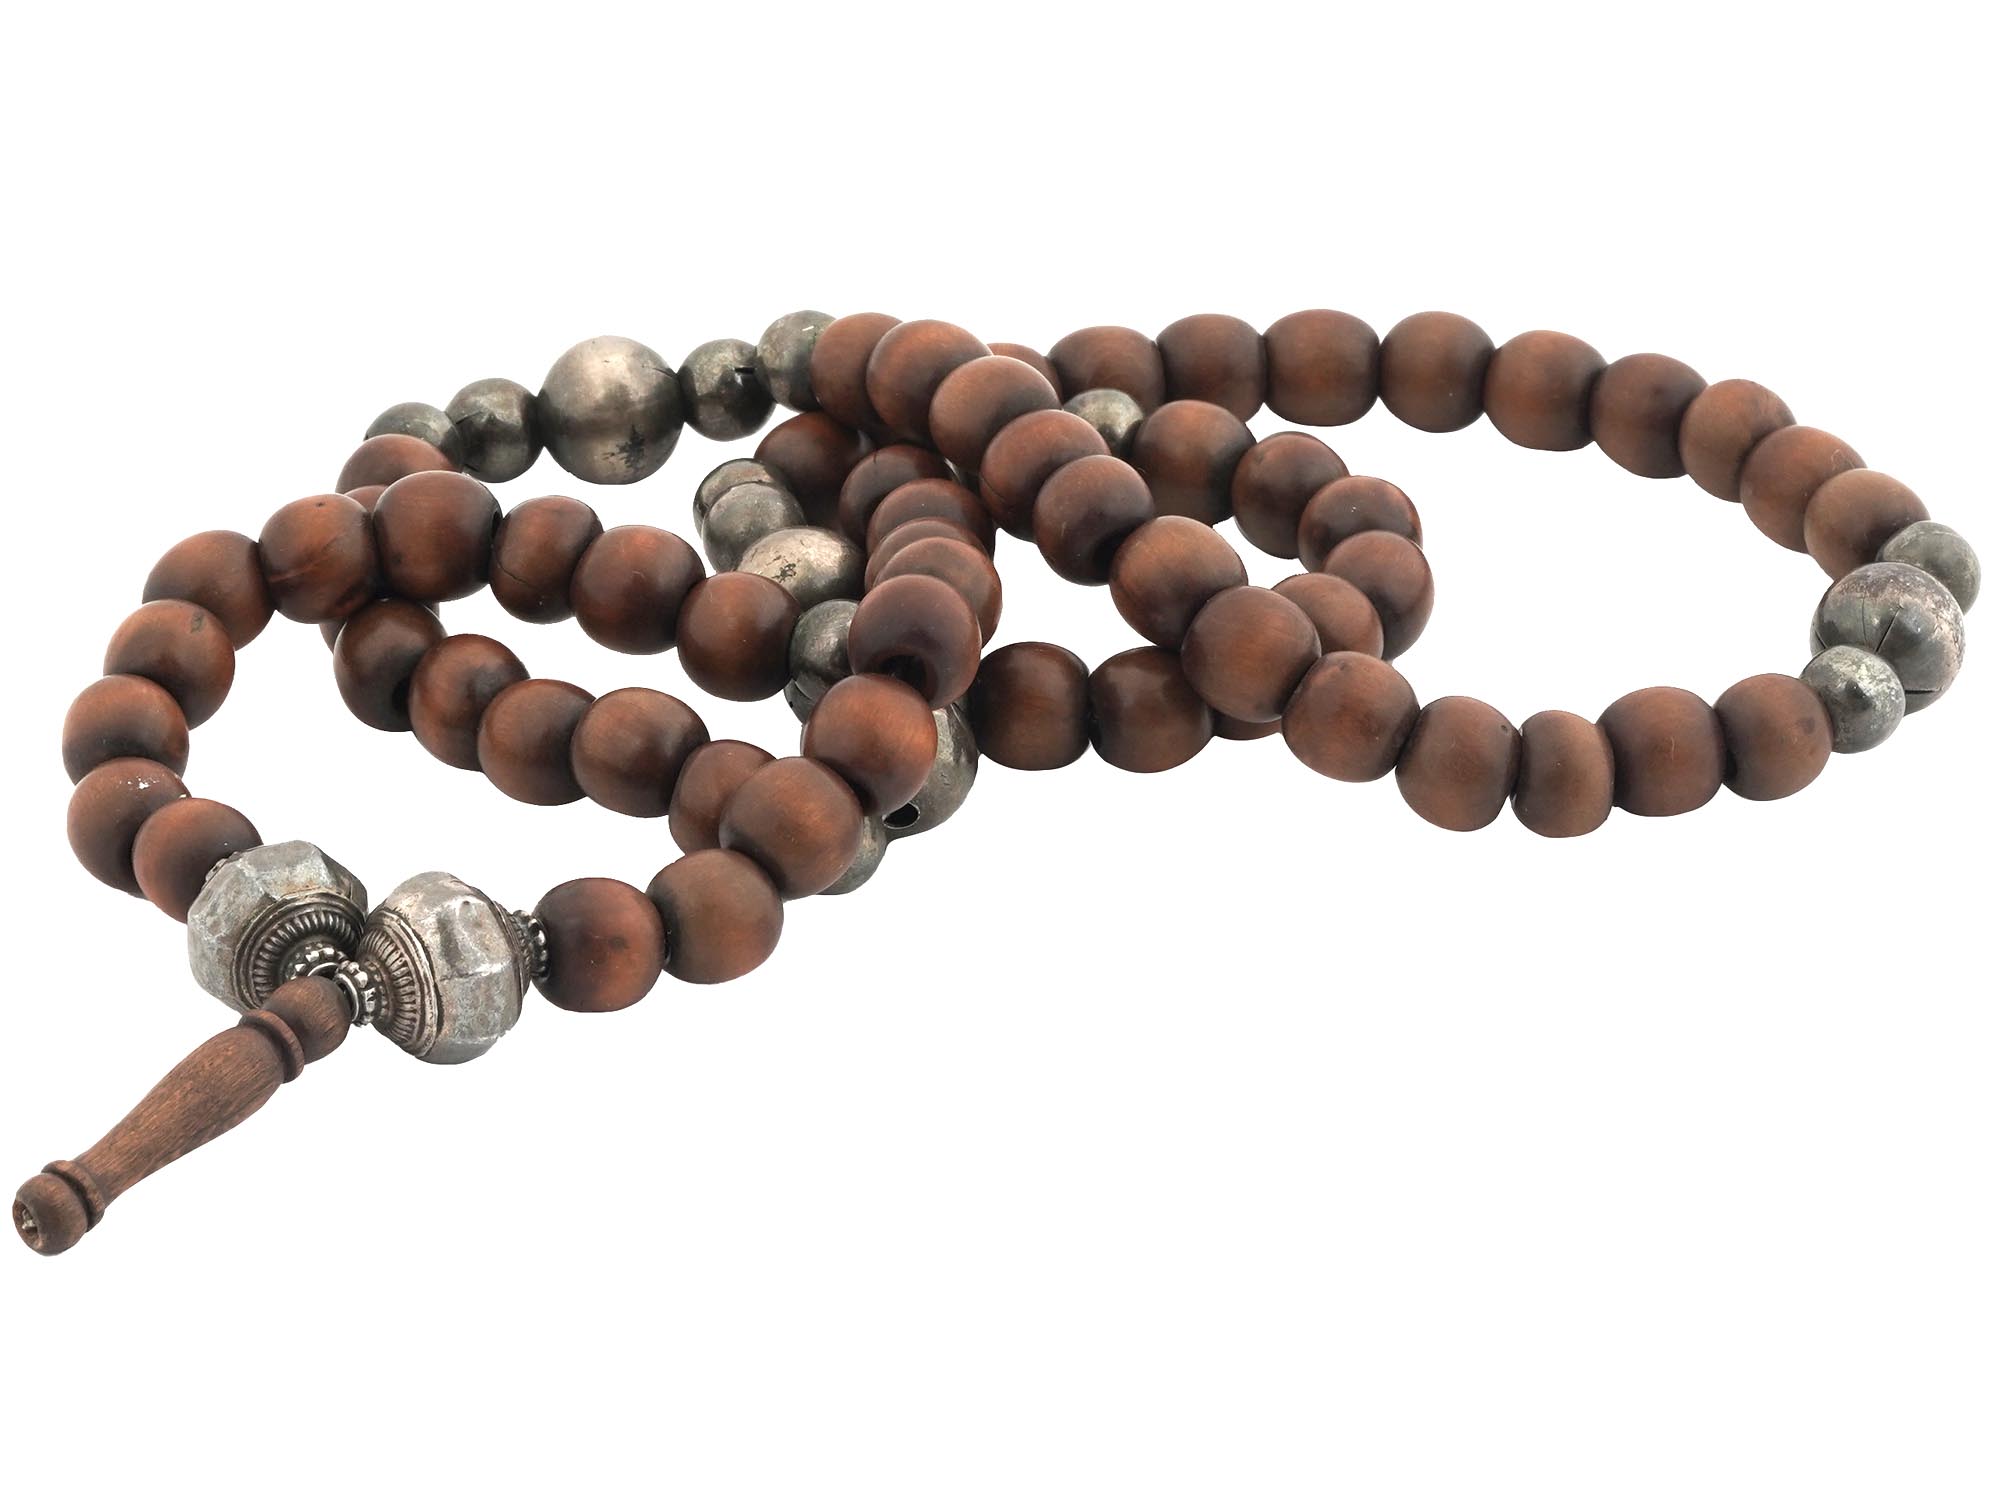 ASIAN BODHI SEED MALAN ROSEWOOD SILVER NECKLACE PIC-0